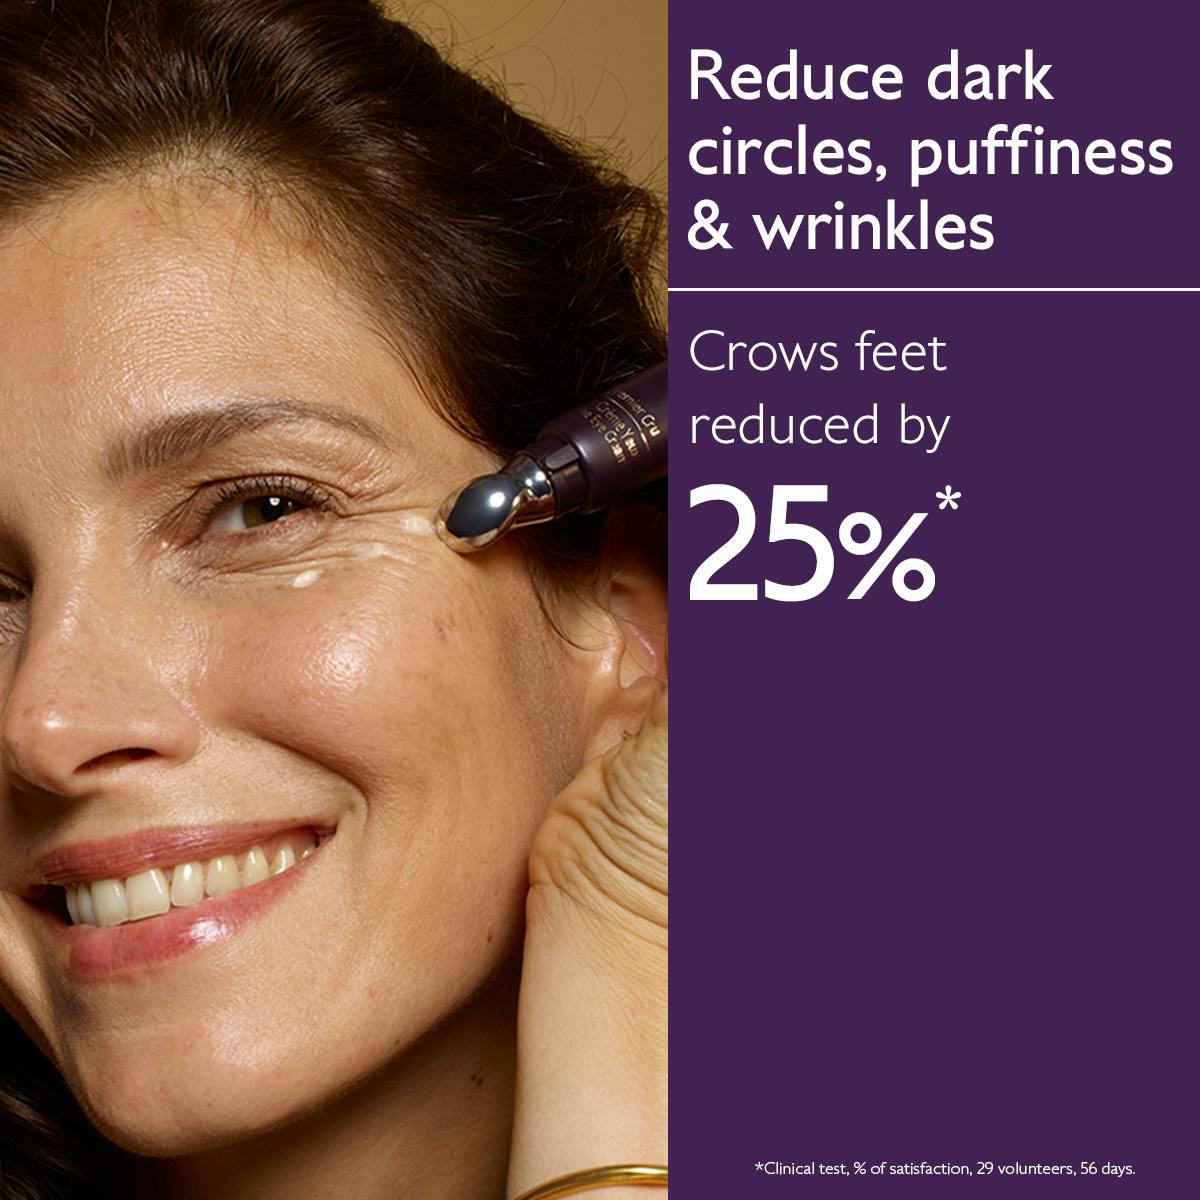 How To Reduce Fine Lines & Wrinkles Under Eyes